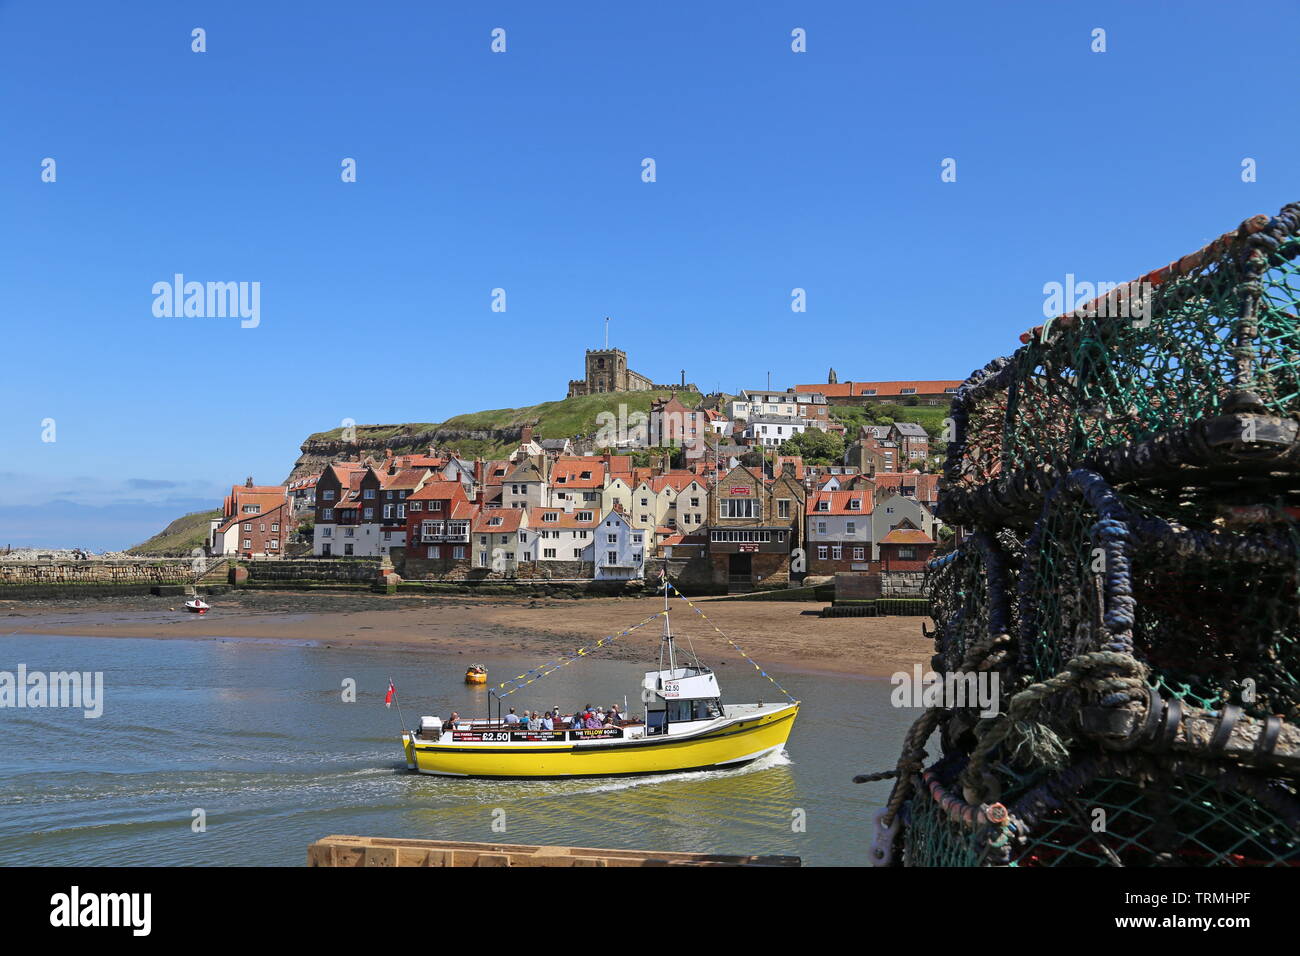 Old Town, Whitby, Borough of Scarborough, North Yorkshire, England, Great Britain, United Kingdom, UK, Europe Stock Photo